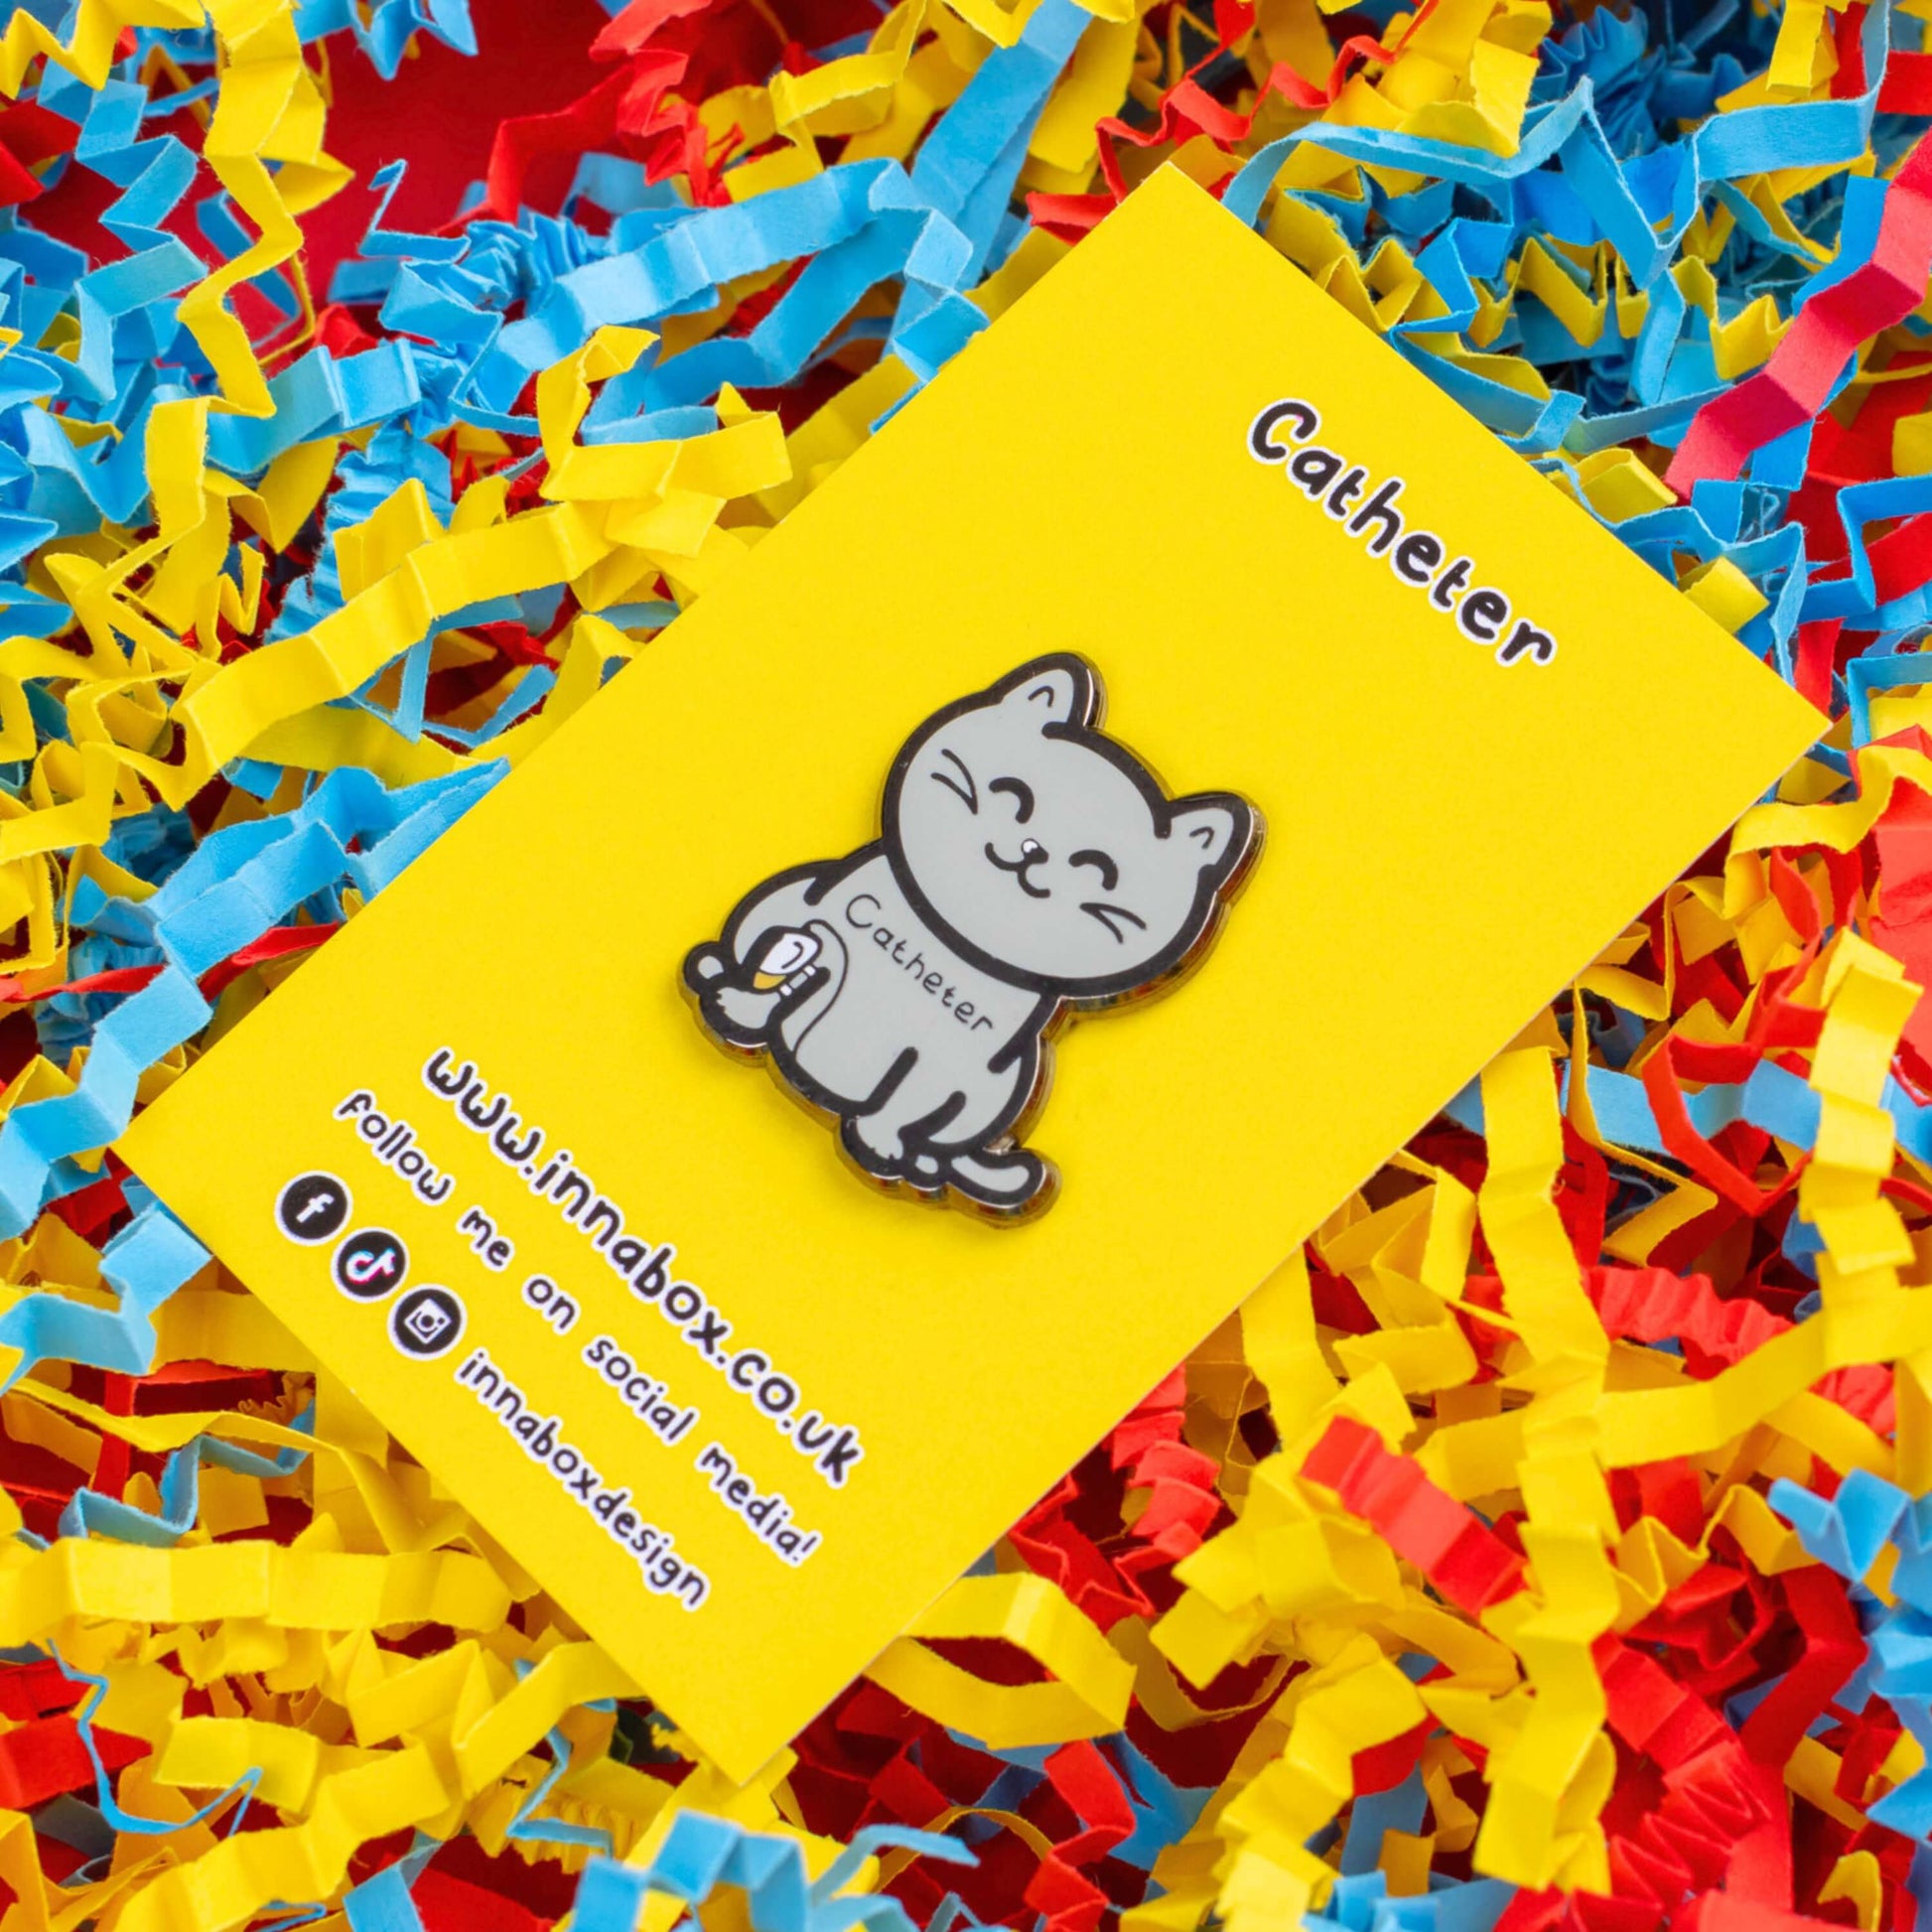 The Catheter Enamel Pin - Catheter on bright yellow backing card laid on a red, yellow and blue card confetti background. The pin is a grey smiling cat sat down with a urine drainage Urostomy pouch strapped to its right leg and text across its chest reading 'catheter'. The pin is designed to raise awareness for bladder problems such as UTIs and other chronic illnesses.